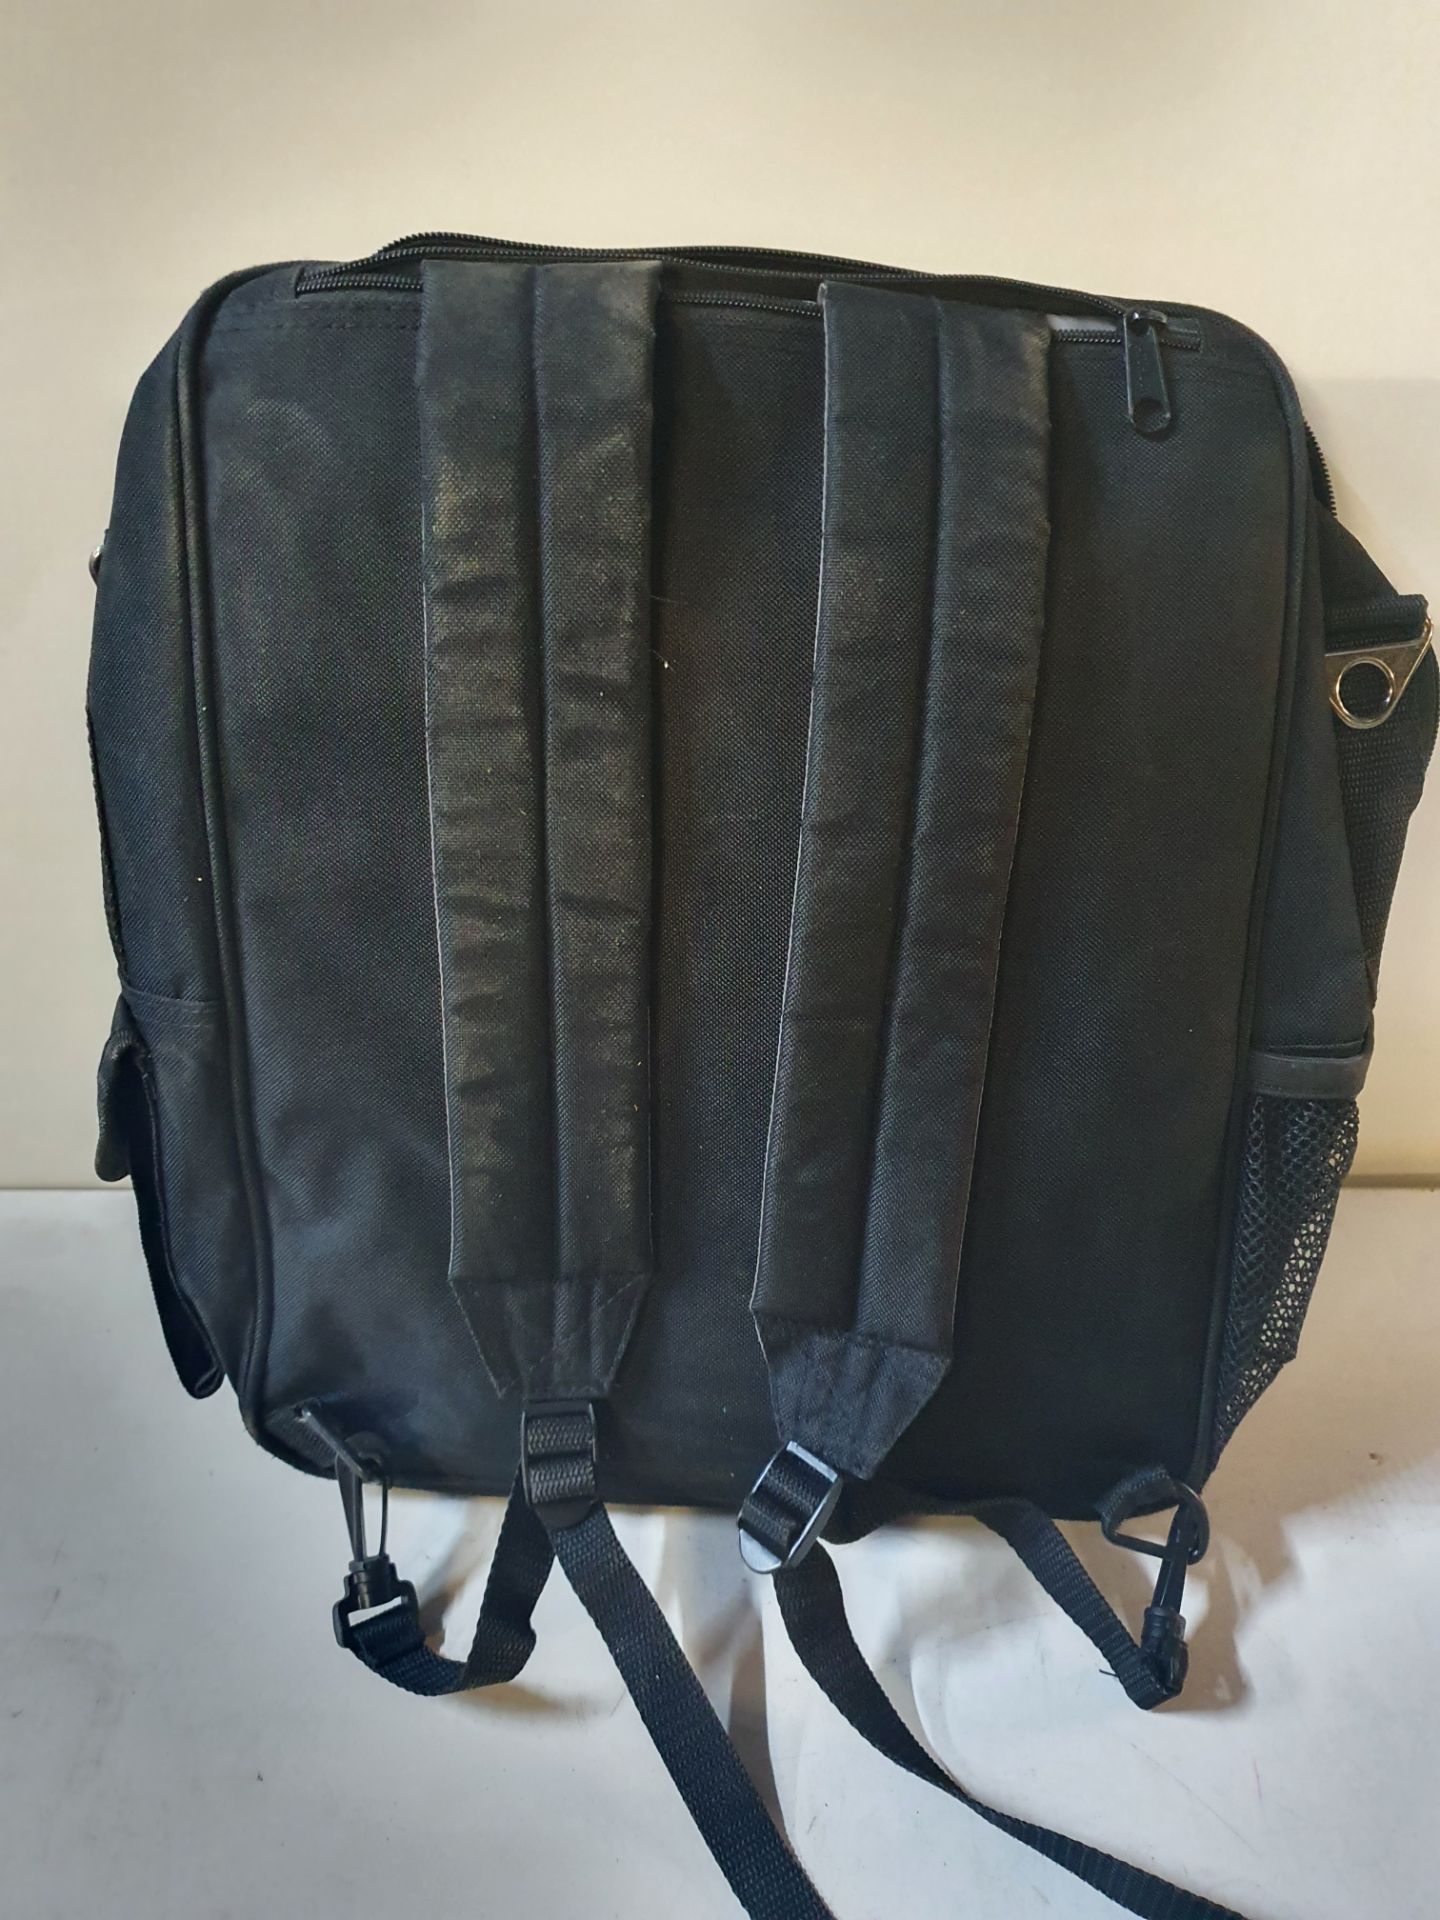 2 x Laptop Bags - Image 5 of 5